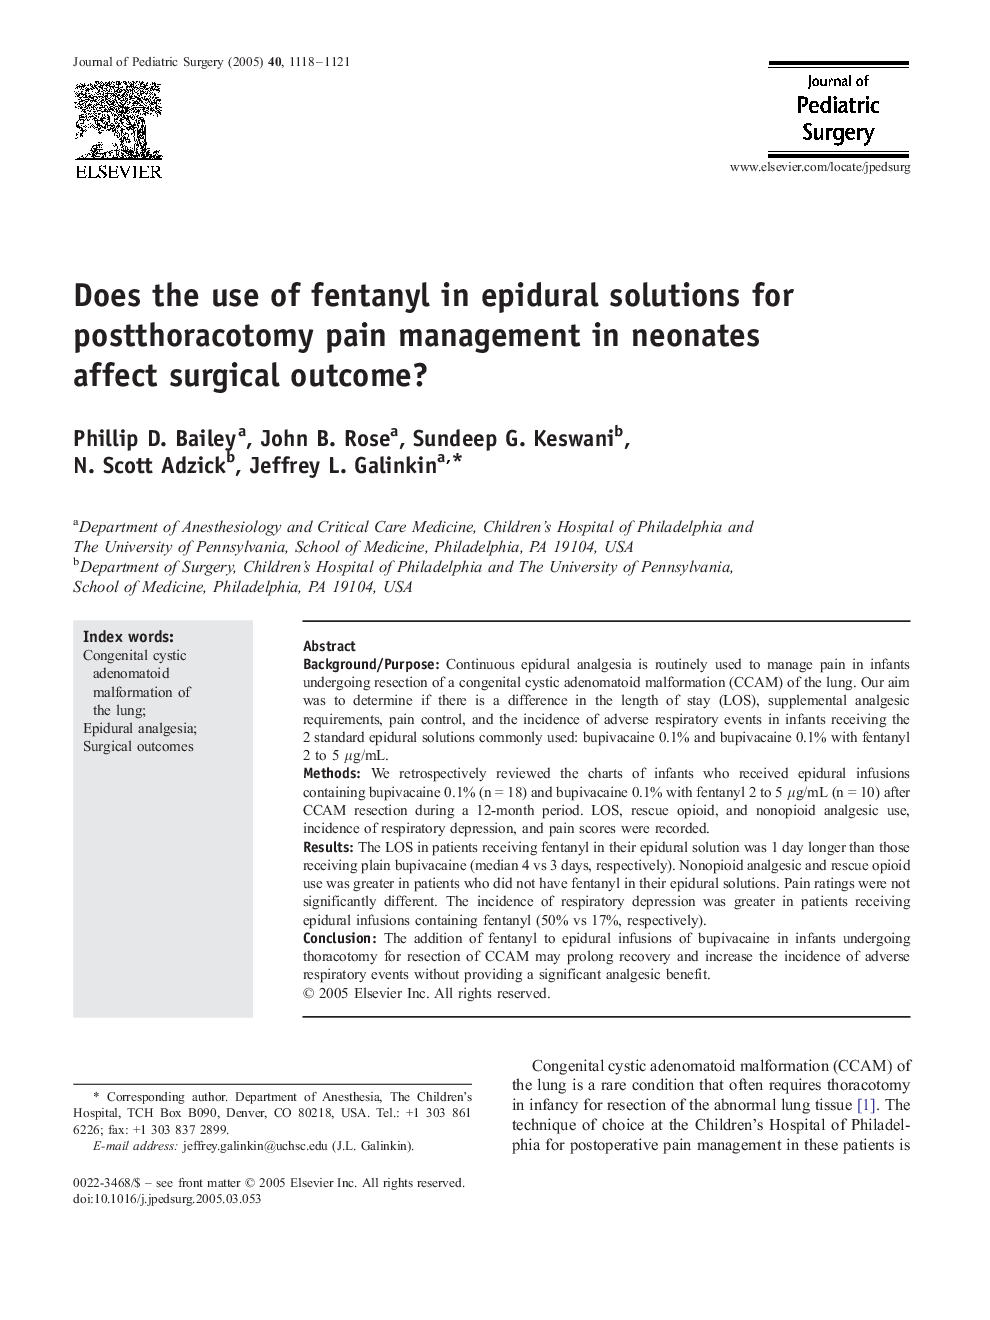 Does the use of fentanyl in epidural solutions for postthoracotomy pain management in neonates affect surgical outcome?